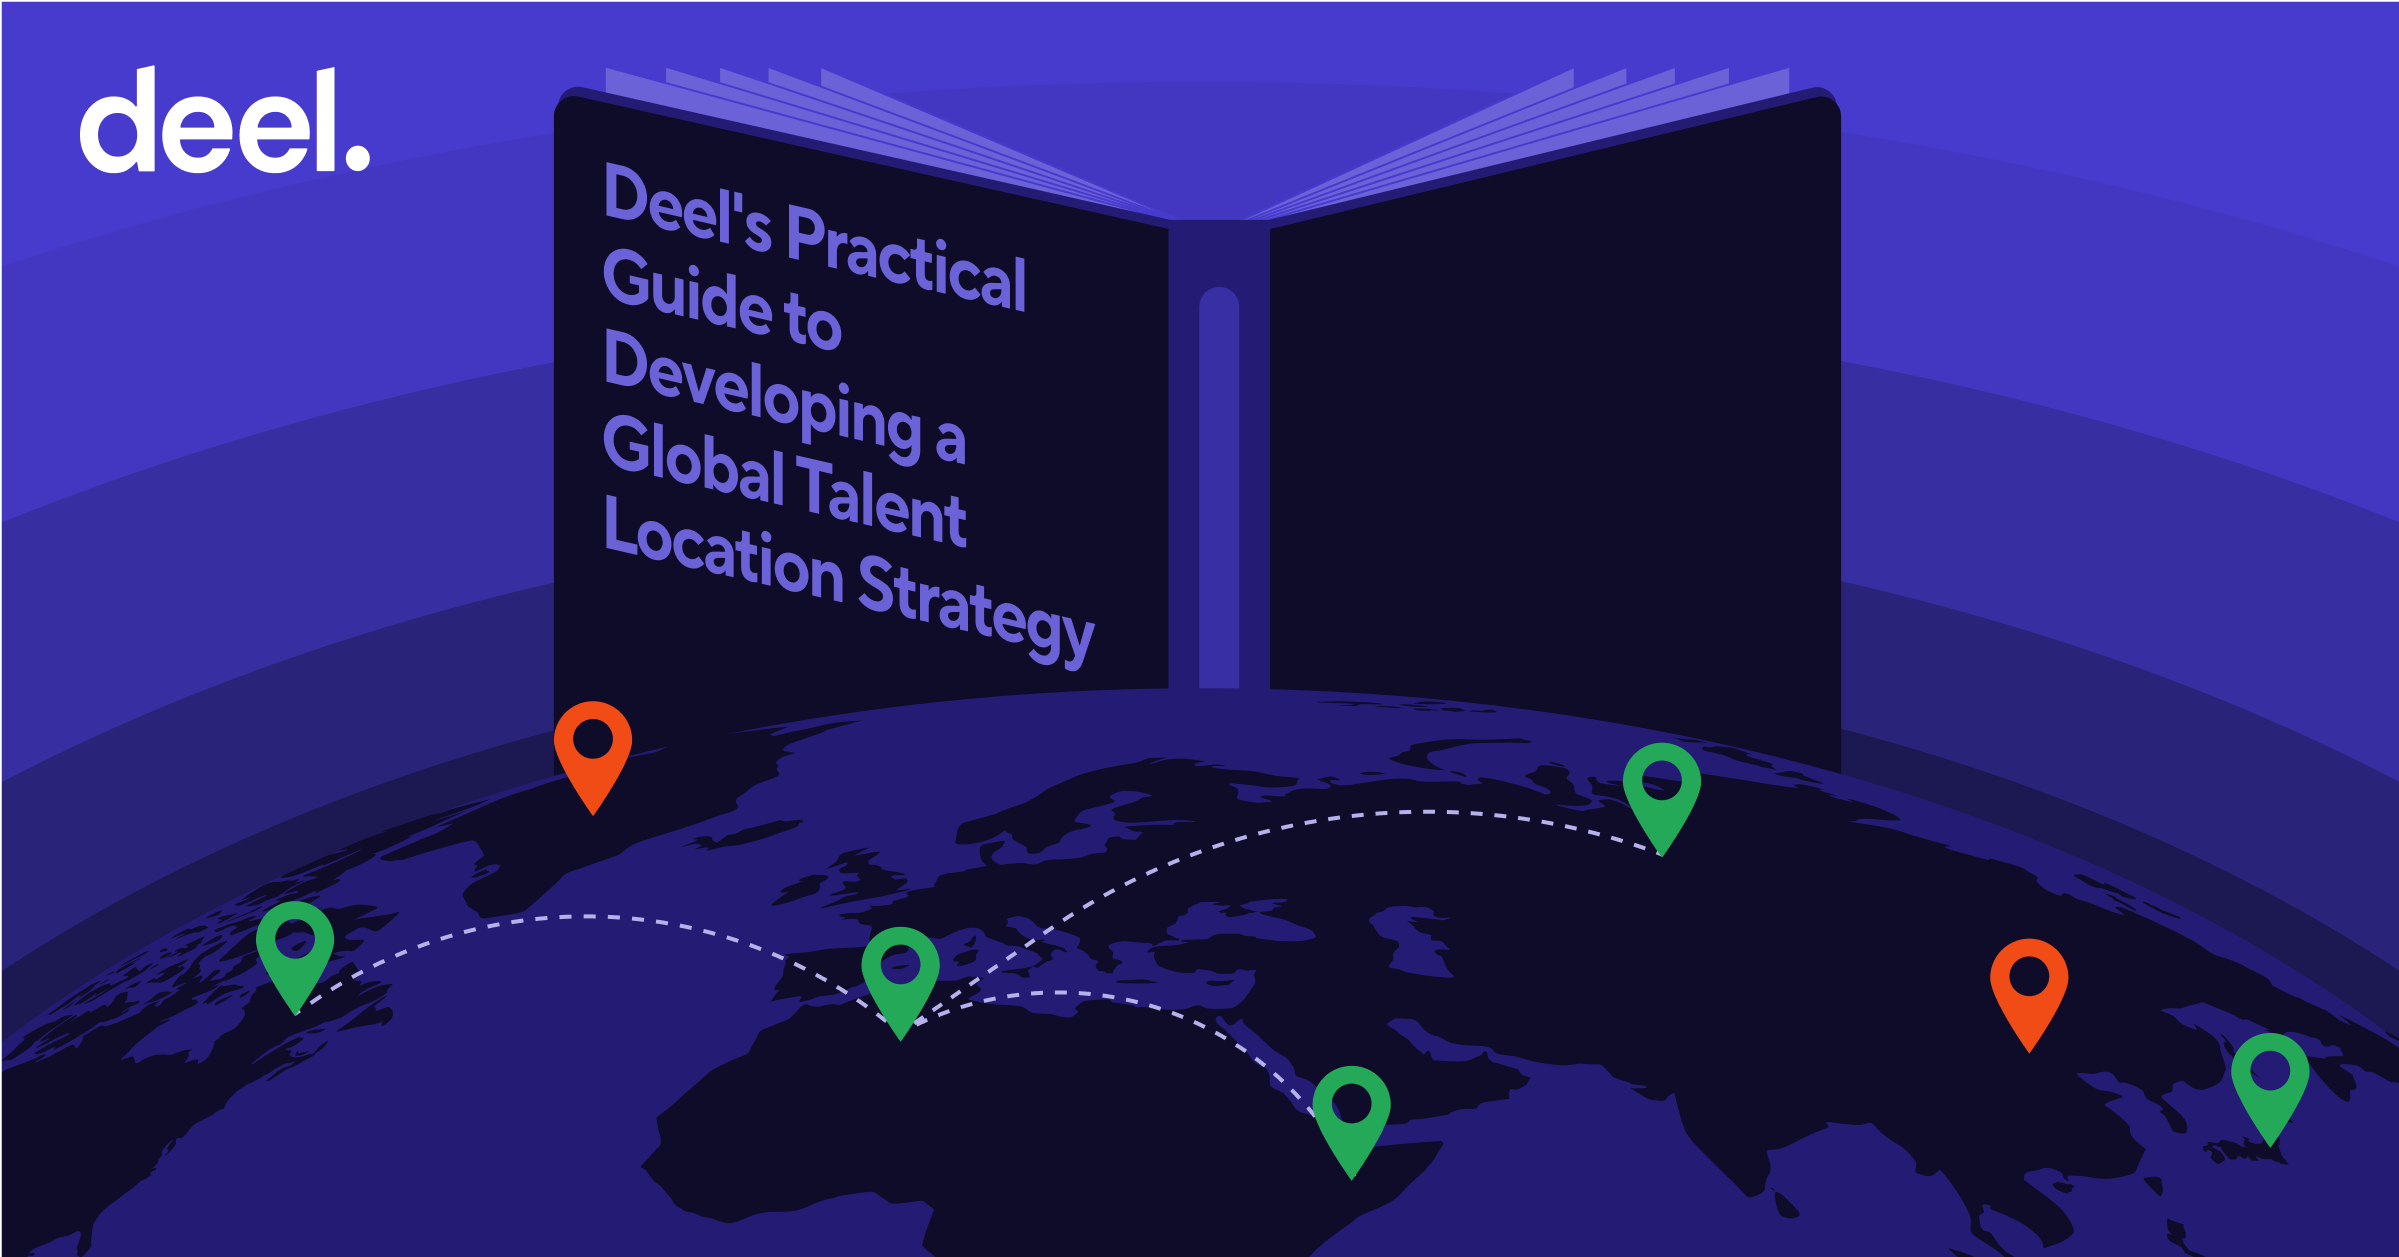 A Practical Guide to Developing a Global Talent Location Strategy